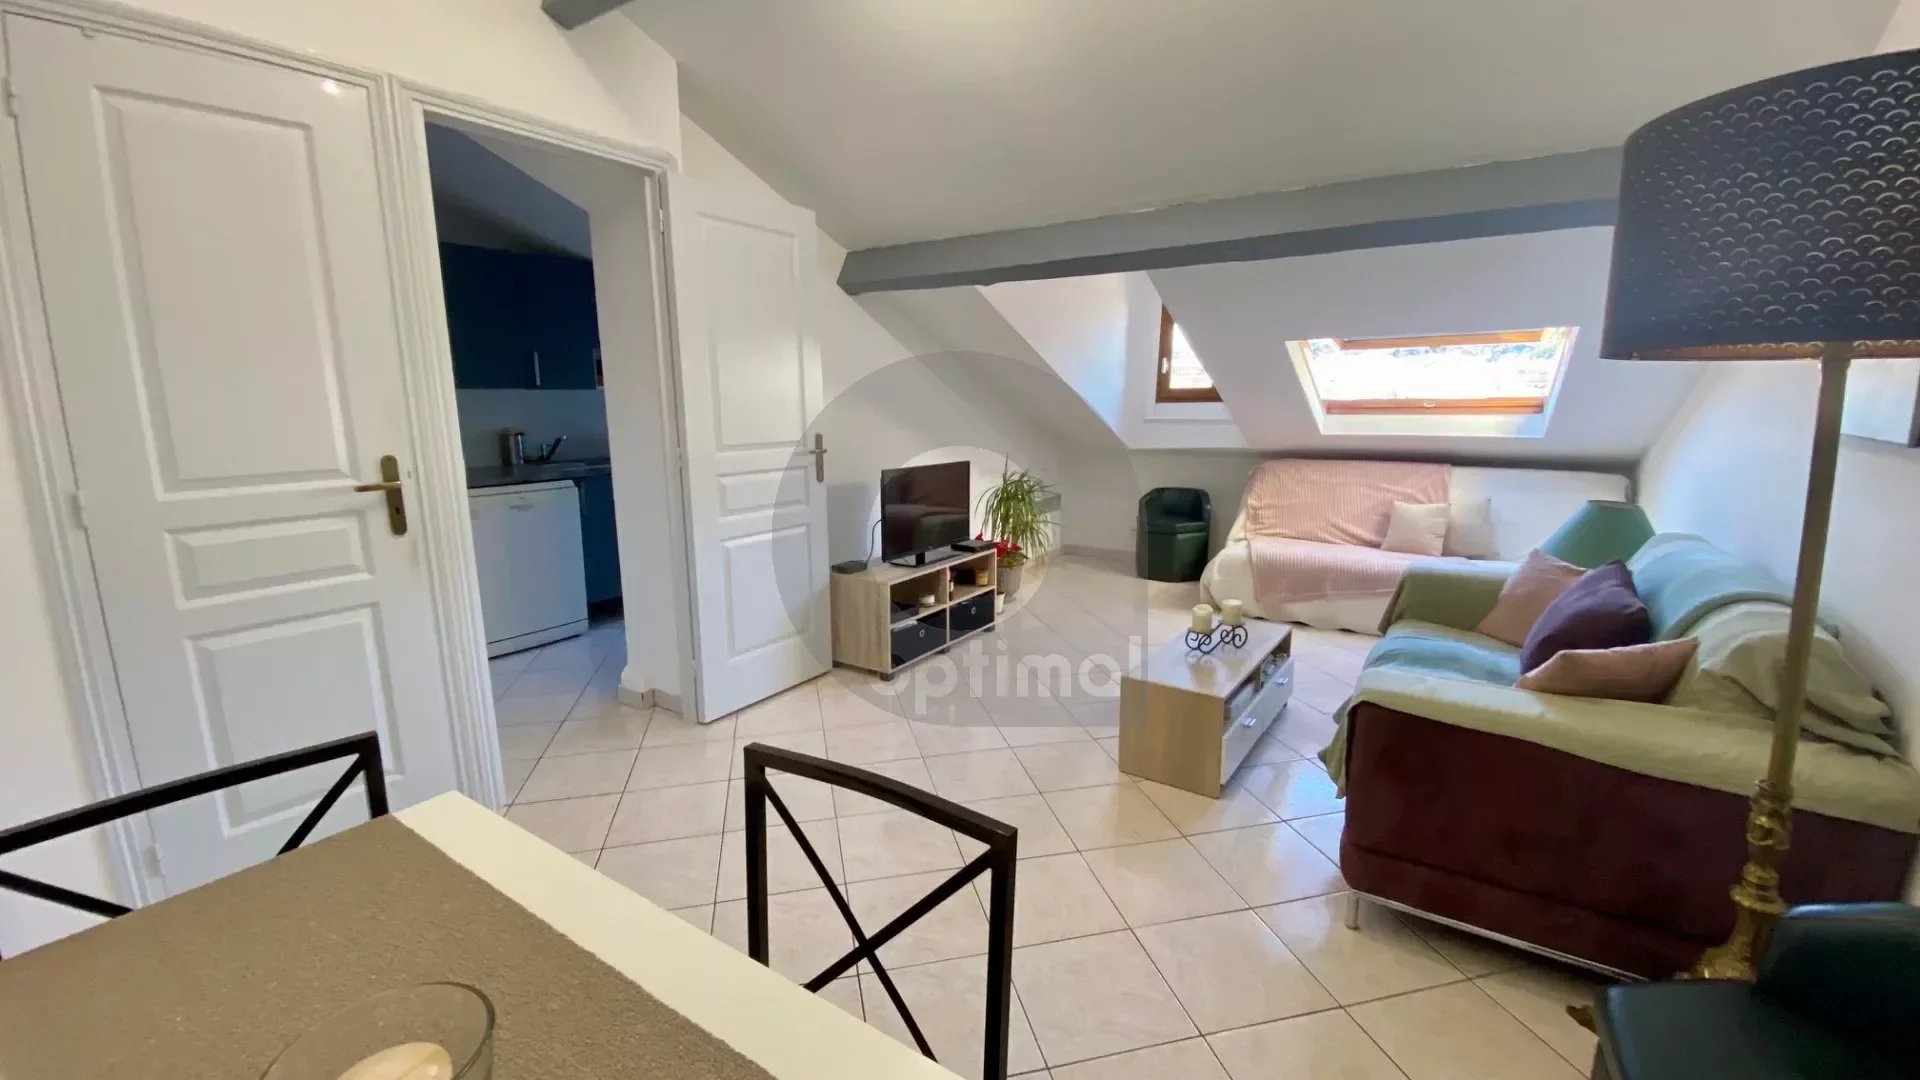 MENTON - Town Centre Spacious 2-room apartment with sloping ceilings